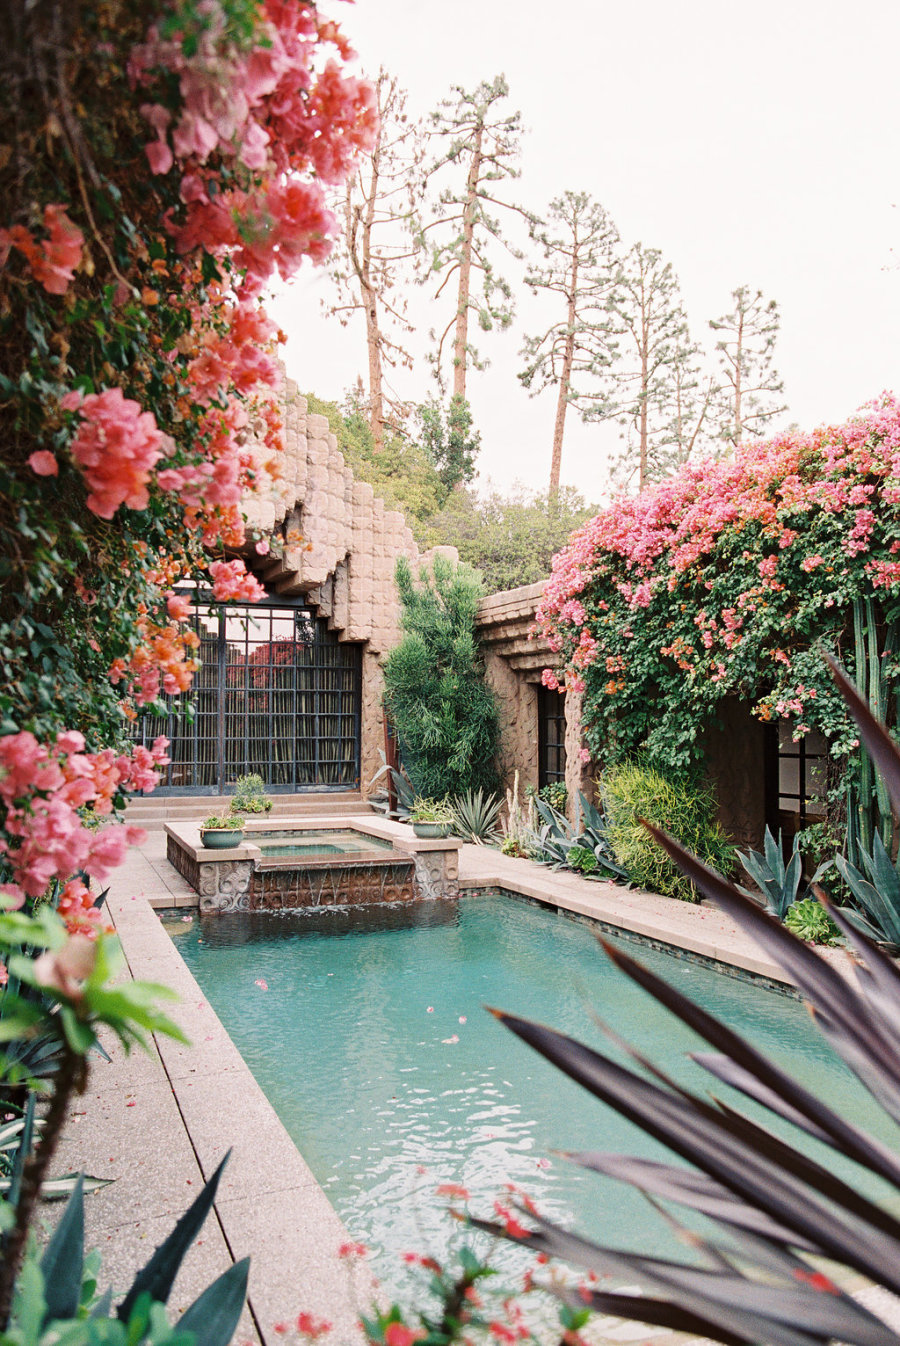 Look at this gorgeous courtyard with a pool   isn't it amazing